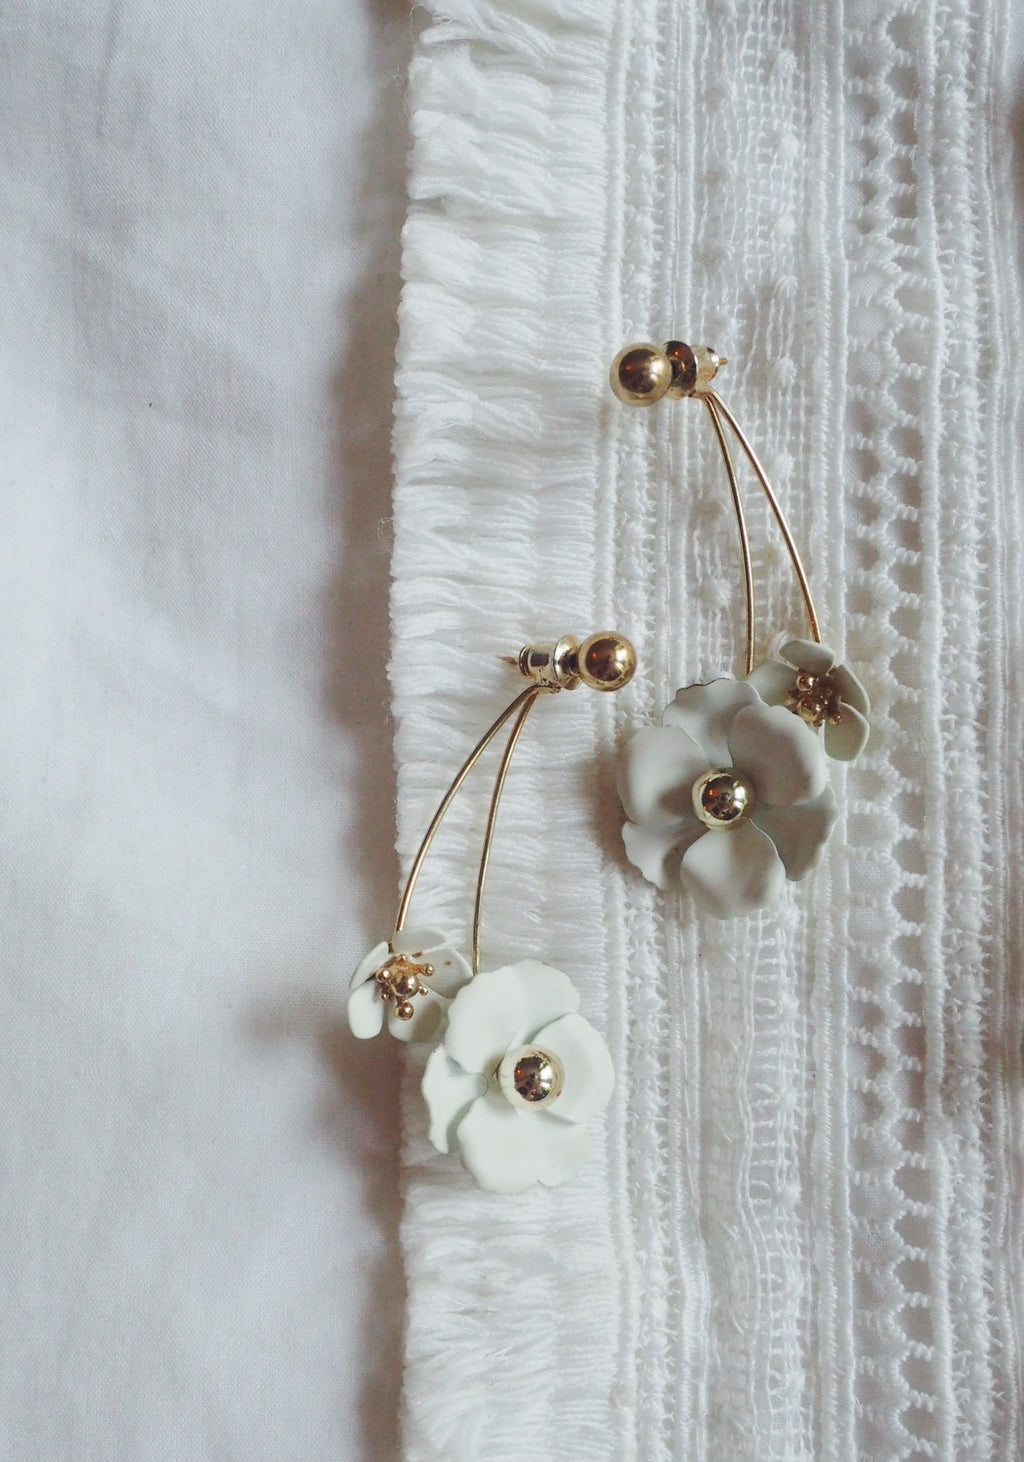 Vintage White Floral Statement Earrings